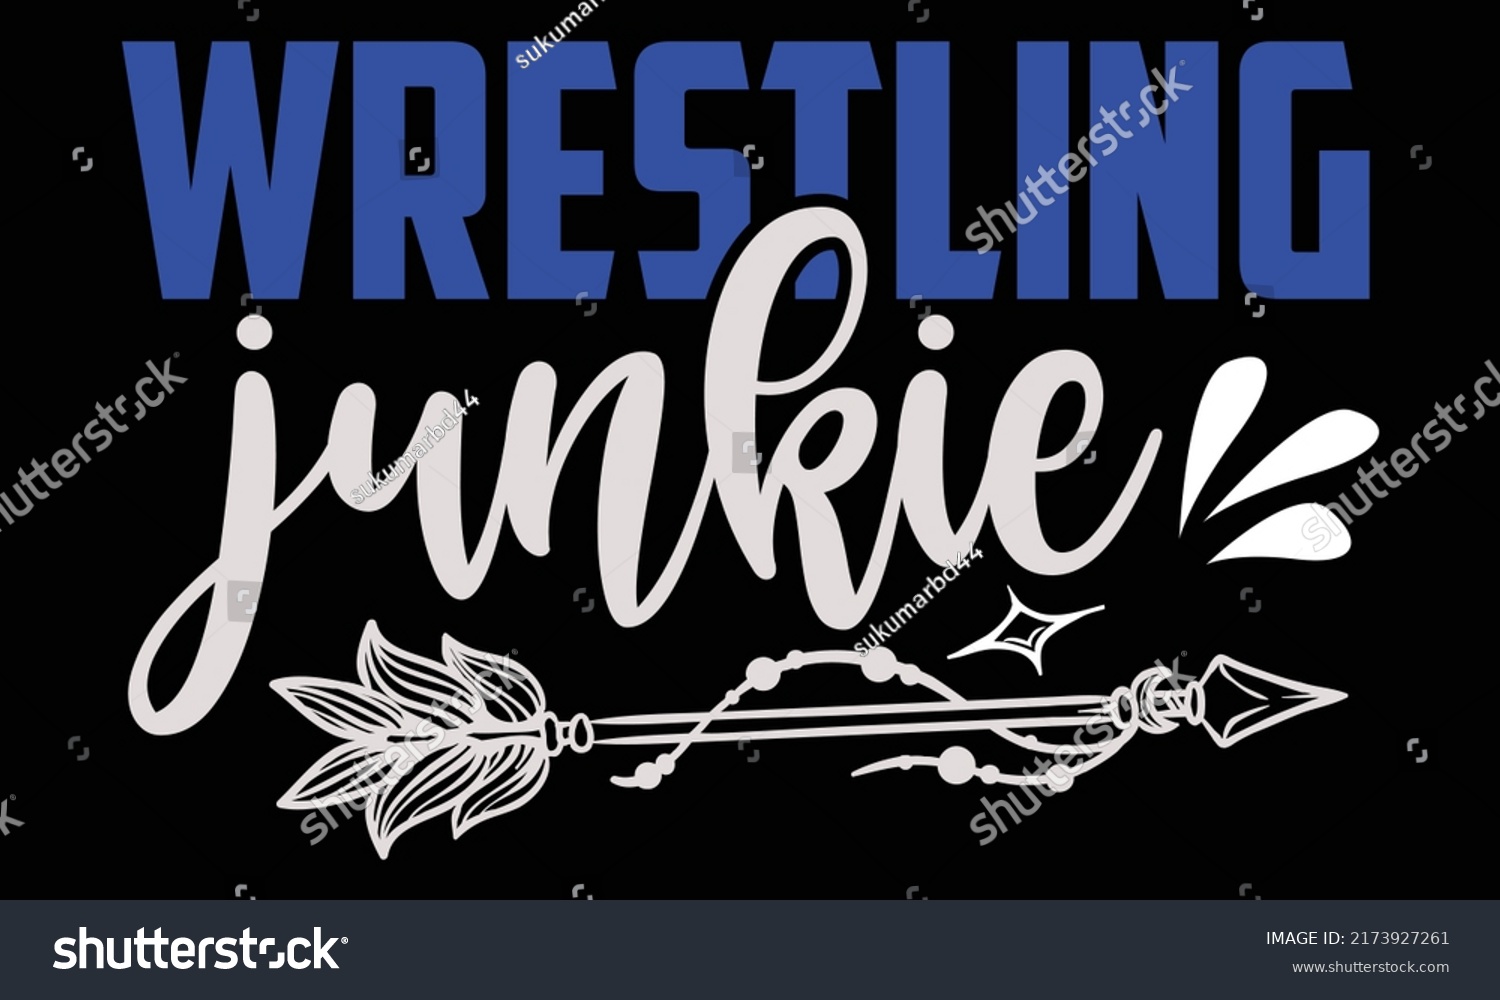 SVG of Wrestling junkie - wrestling t shirts design, Hand drawn lettering phrase, Calligraphy t shirt design, Isolated on white background, svg Files for Cutting and Silhouette, EPS 10 svg